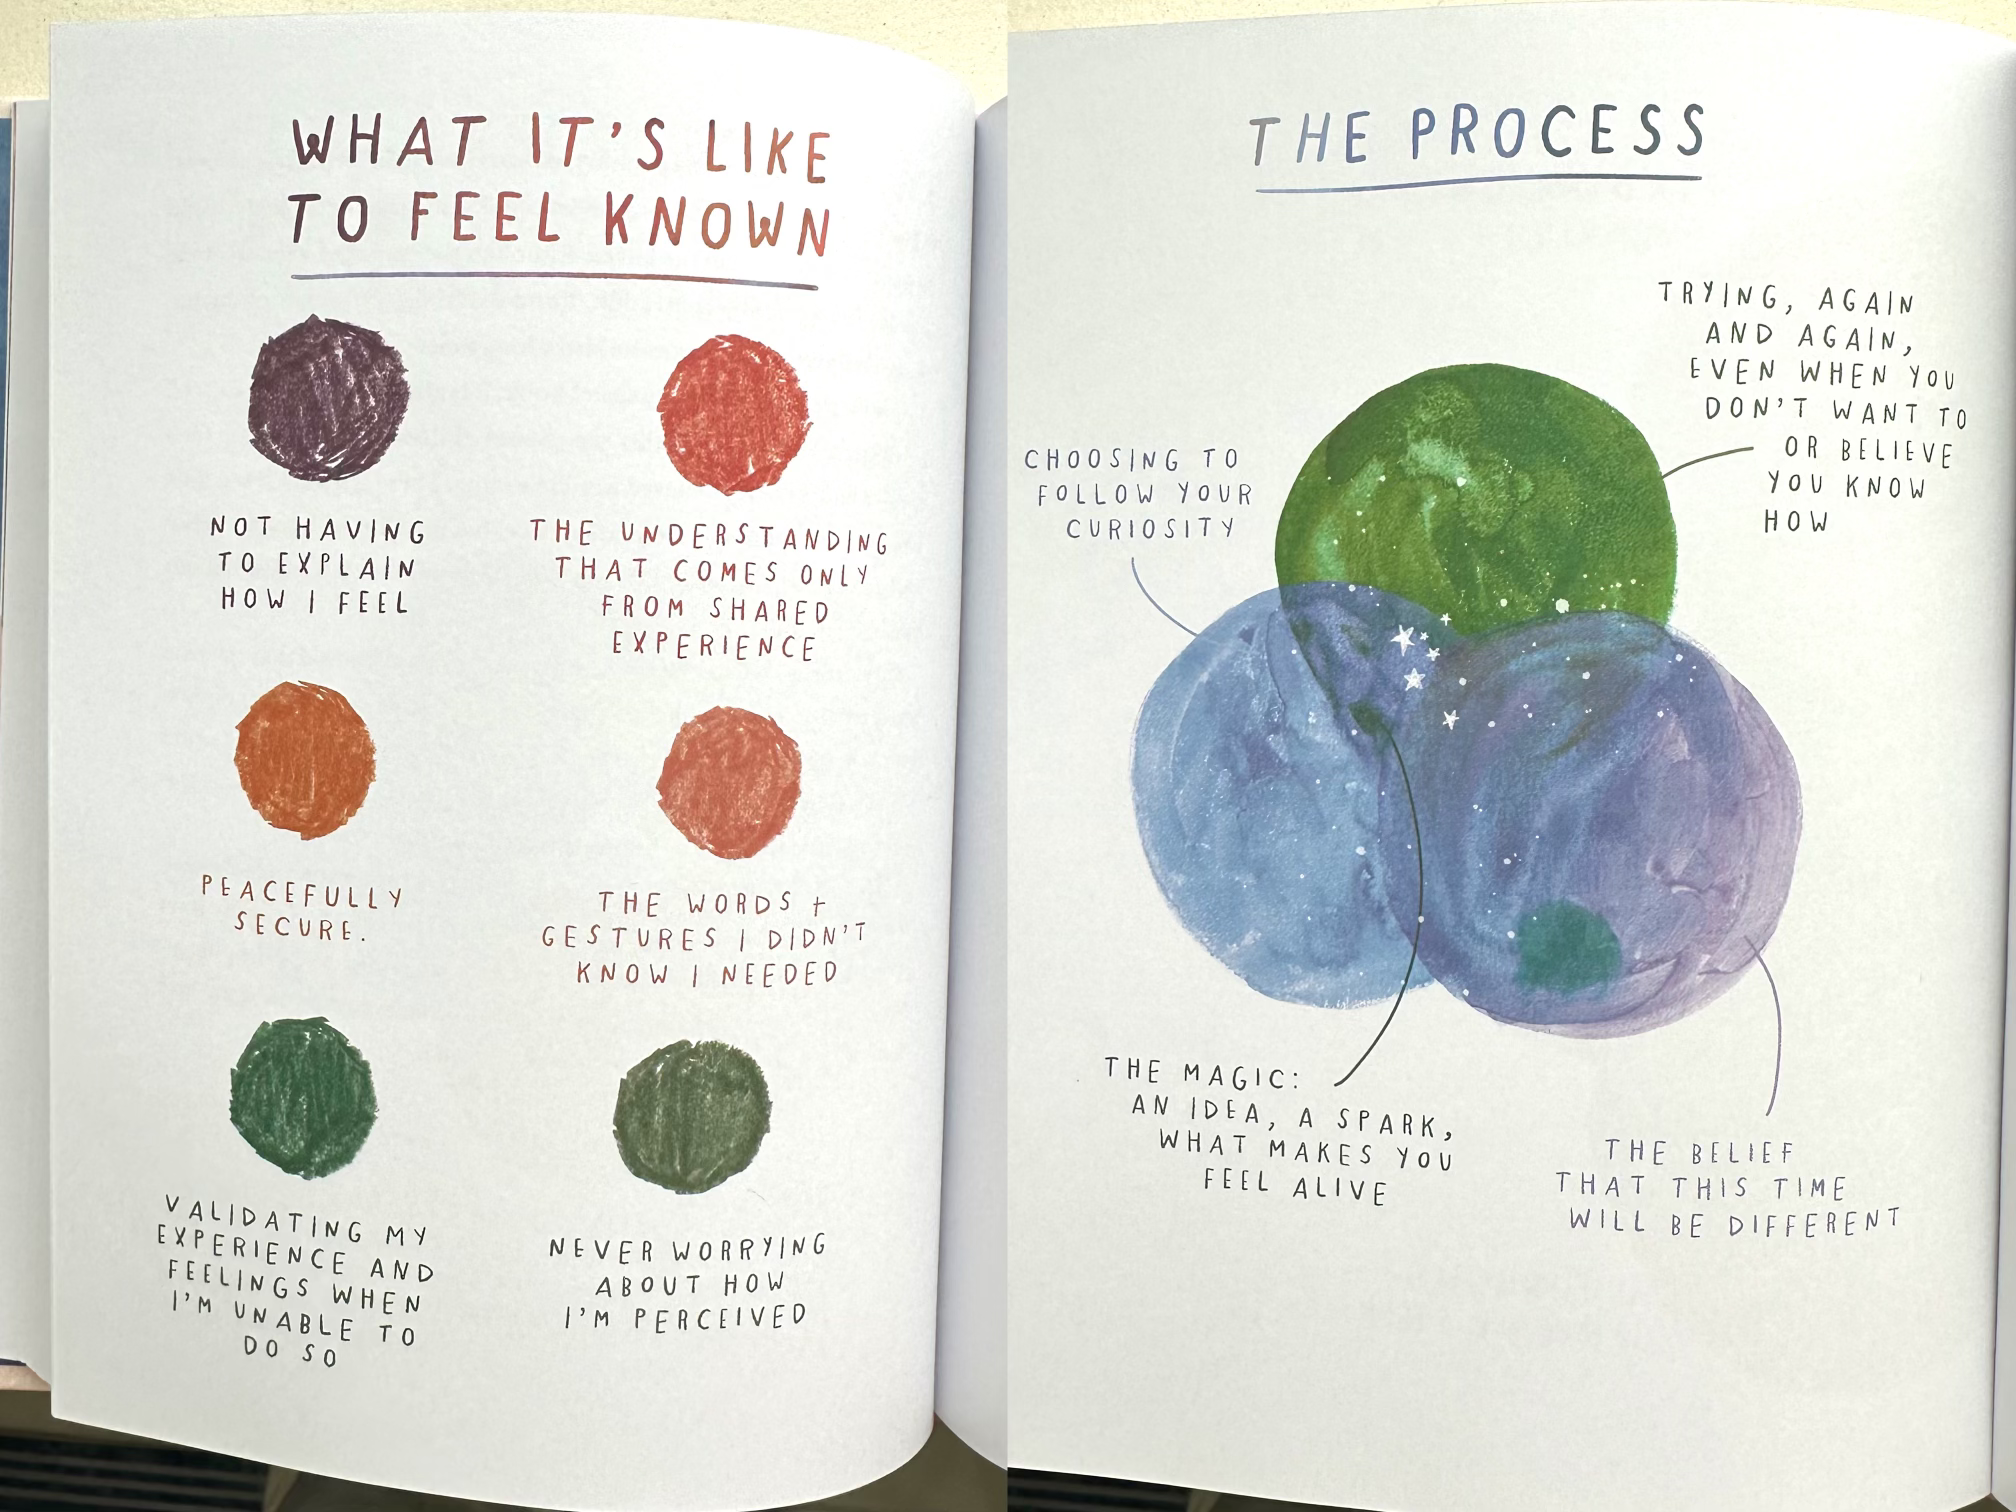 Two palettes from Meera's book: "What it's like to feel known" is maroon, red, and green and "The process" is a blend of hunter green, blue, and lilac.